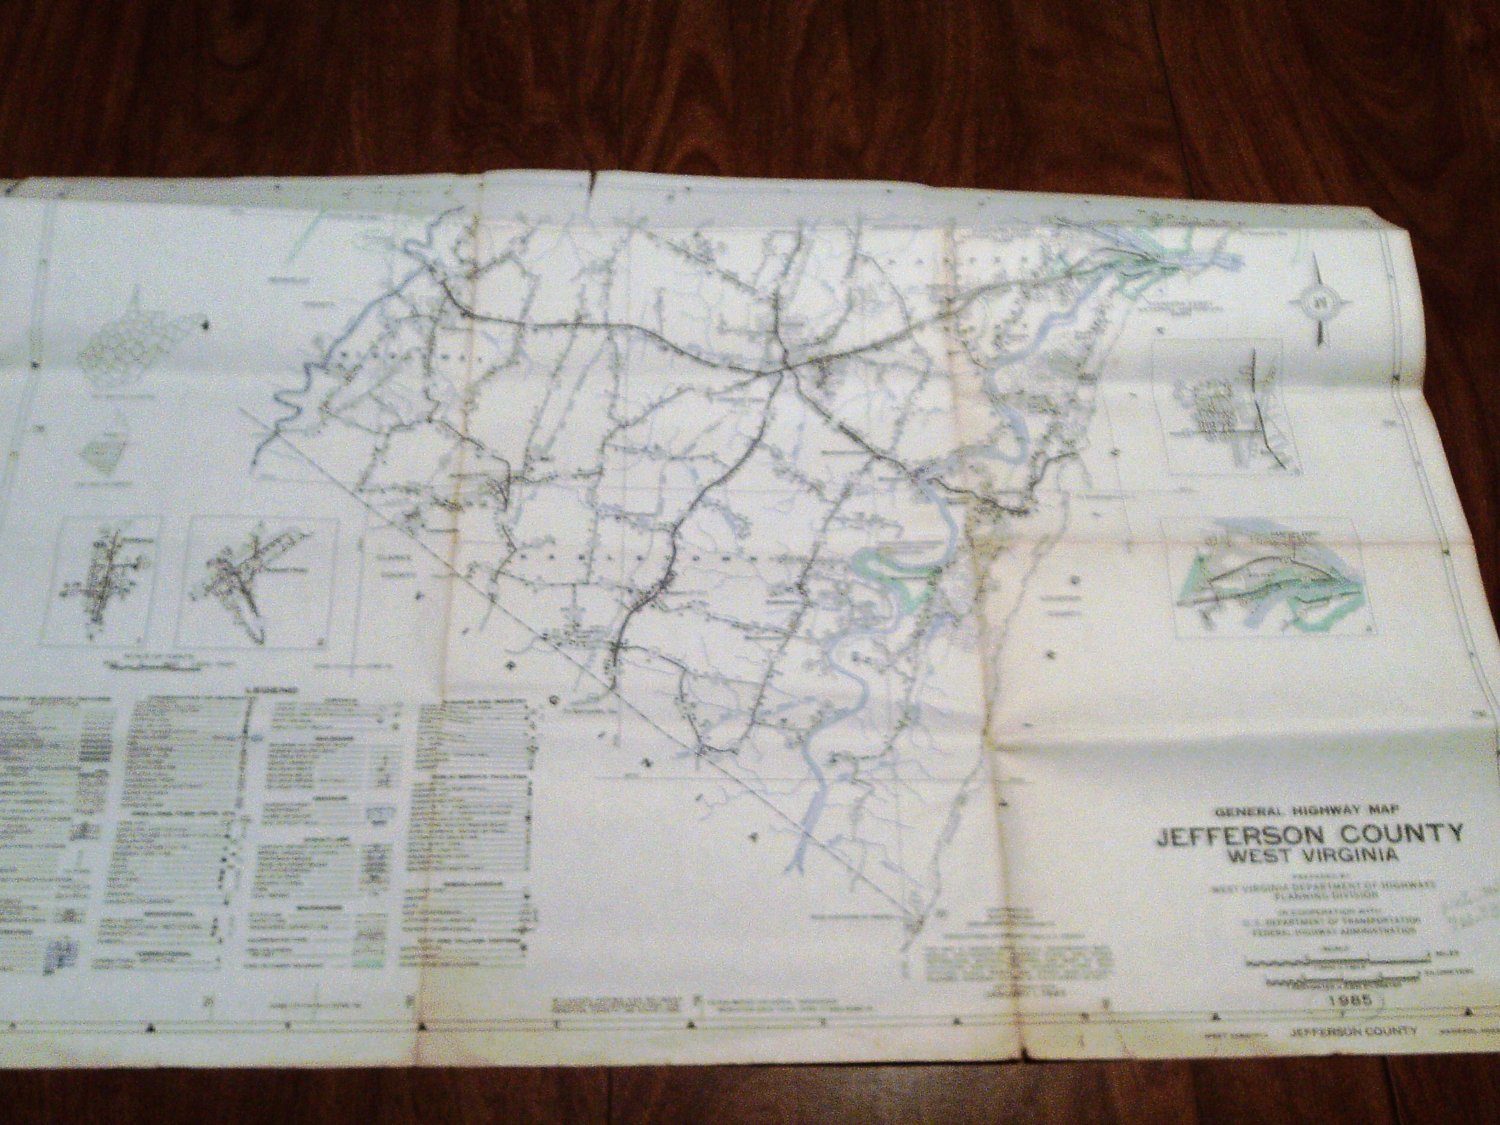 Jefferson County West Virginia General Highway Map 1985 2 Sheet Map 6668